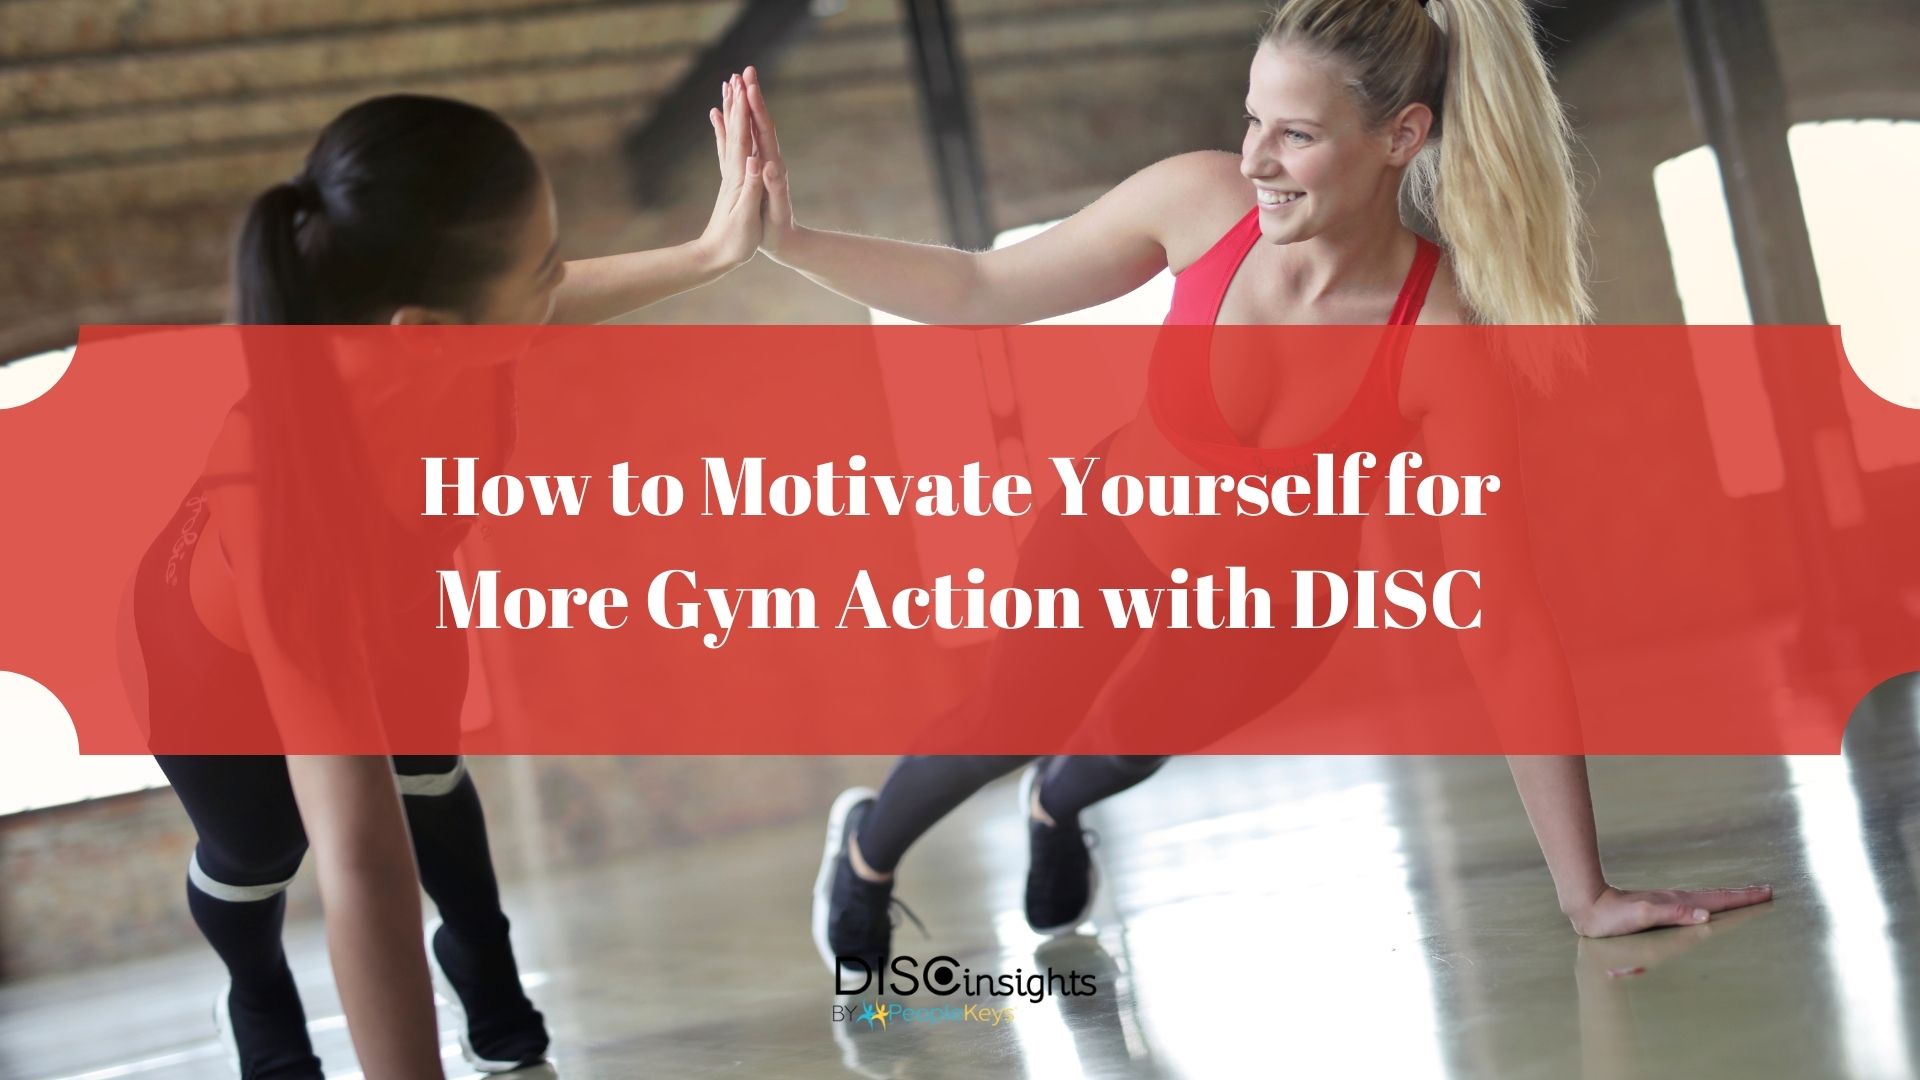 How to Motivate Yourself for More Gym Action with DISC